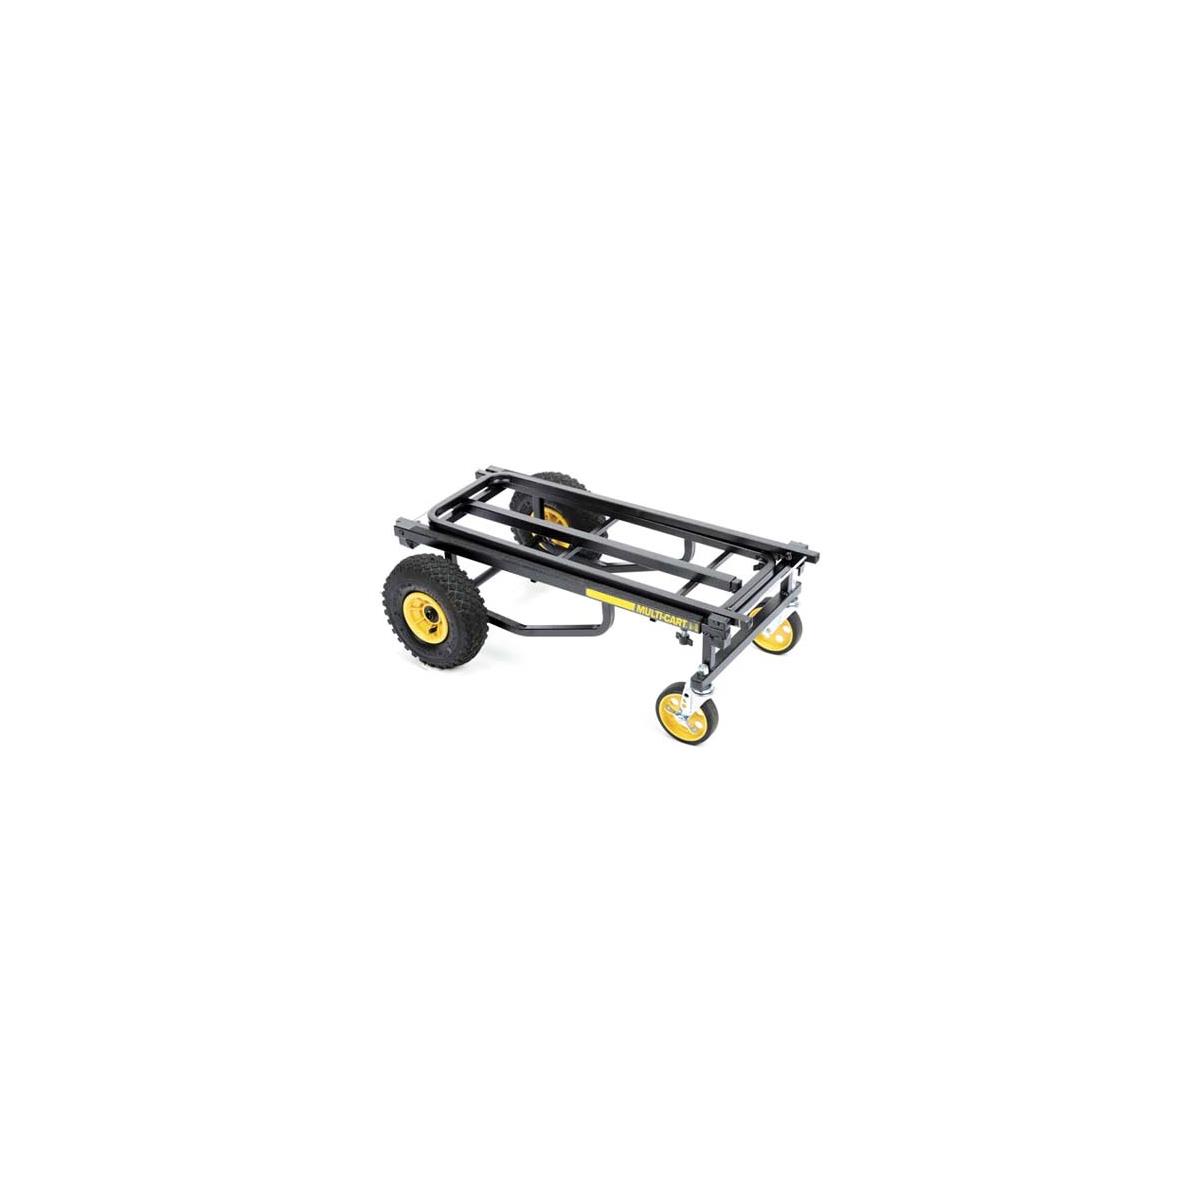 Image of Rock N Roller Multi-Cart R10 Max Transporter with R-Trac Tires